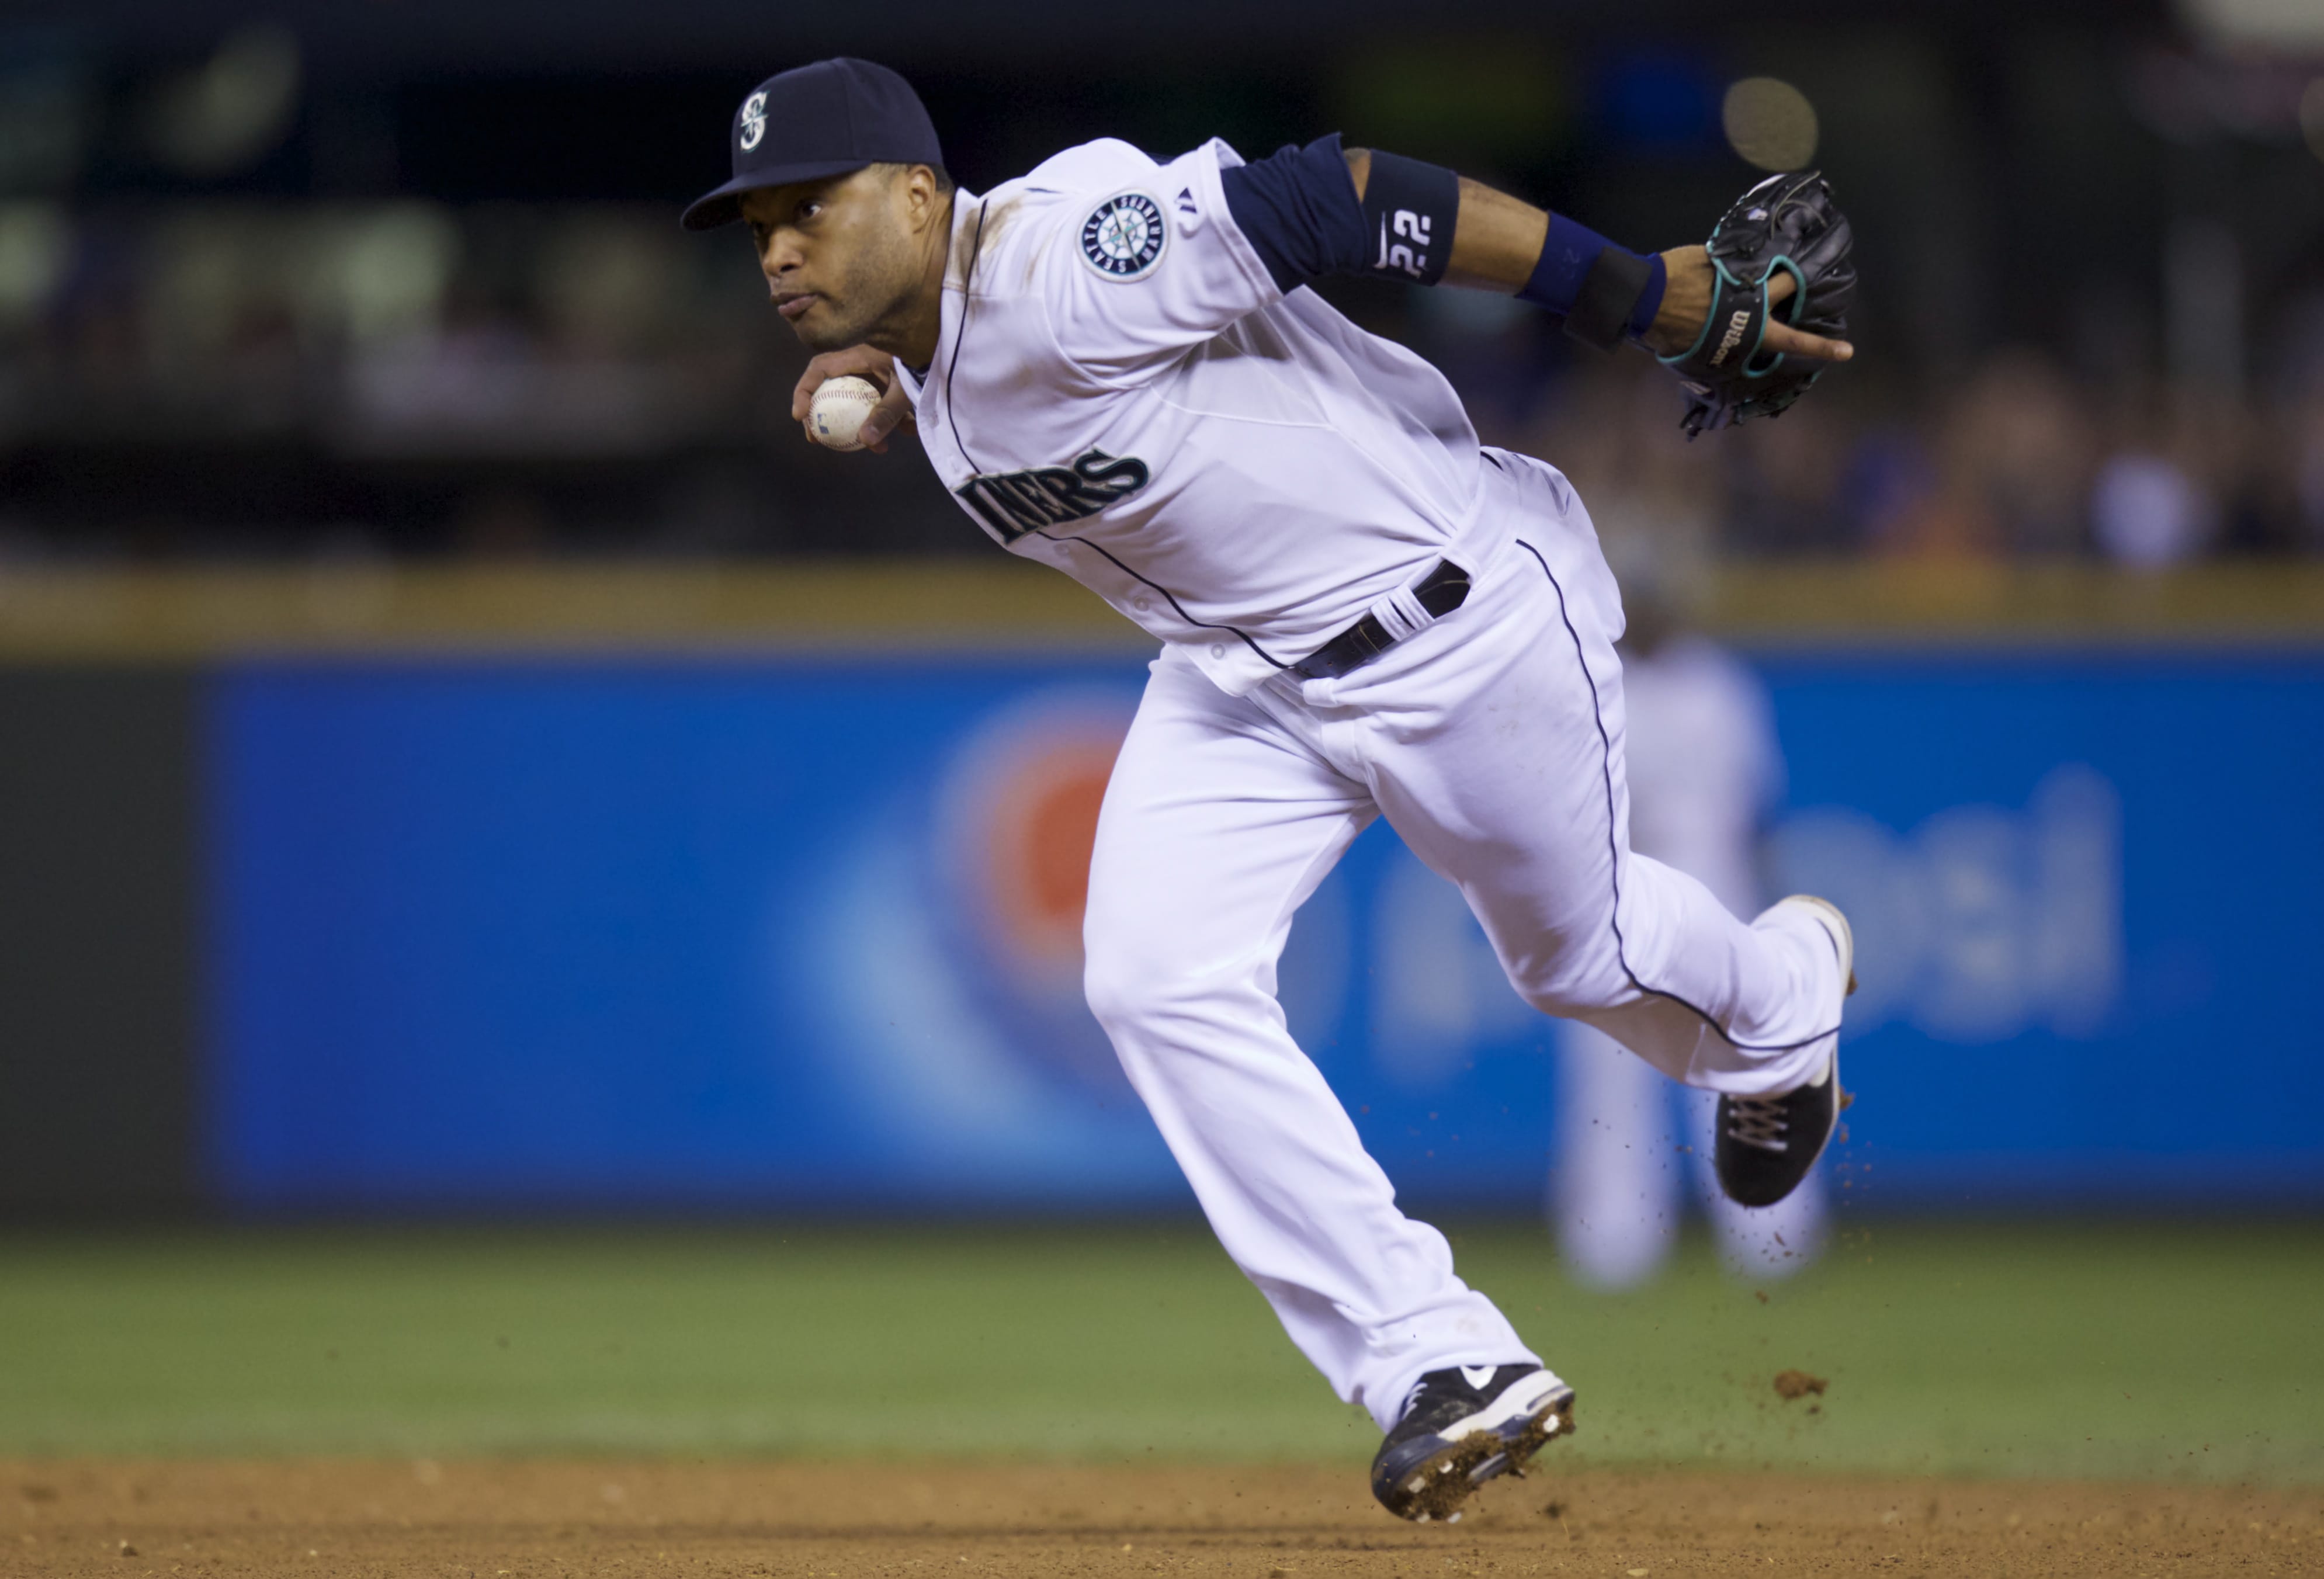 Seattle Mariners second baseman Robinson Cano throws a ball to first base after fielding deflection during the ninth inning a baseball game against the Toronto Blue Jays, Wednesday, Aug. 13, 2014, in Seattle. The Mariners won 2-0.